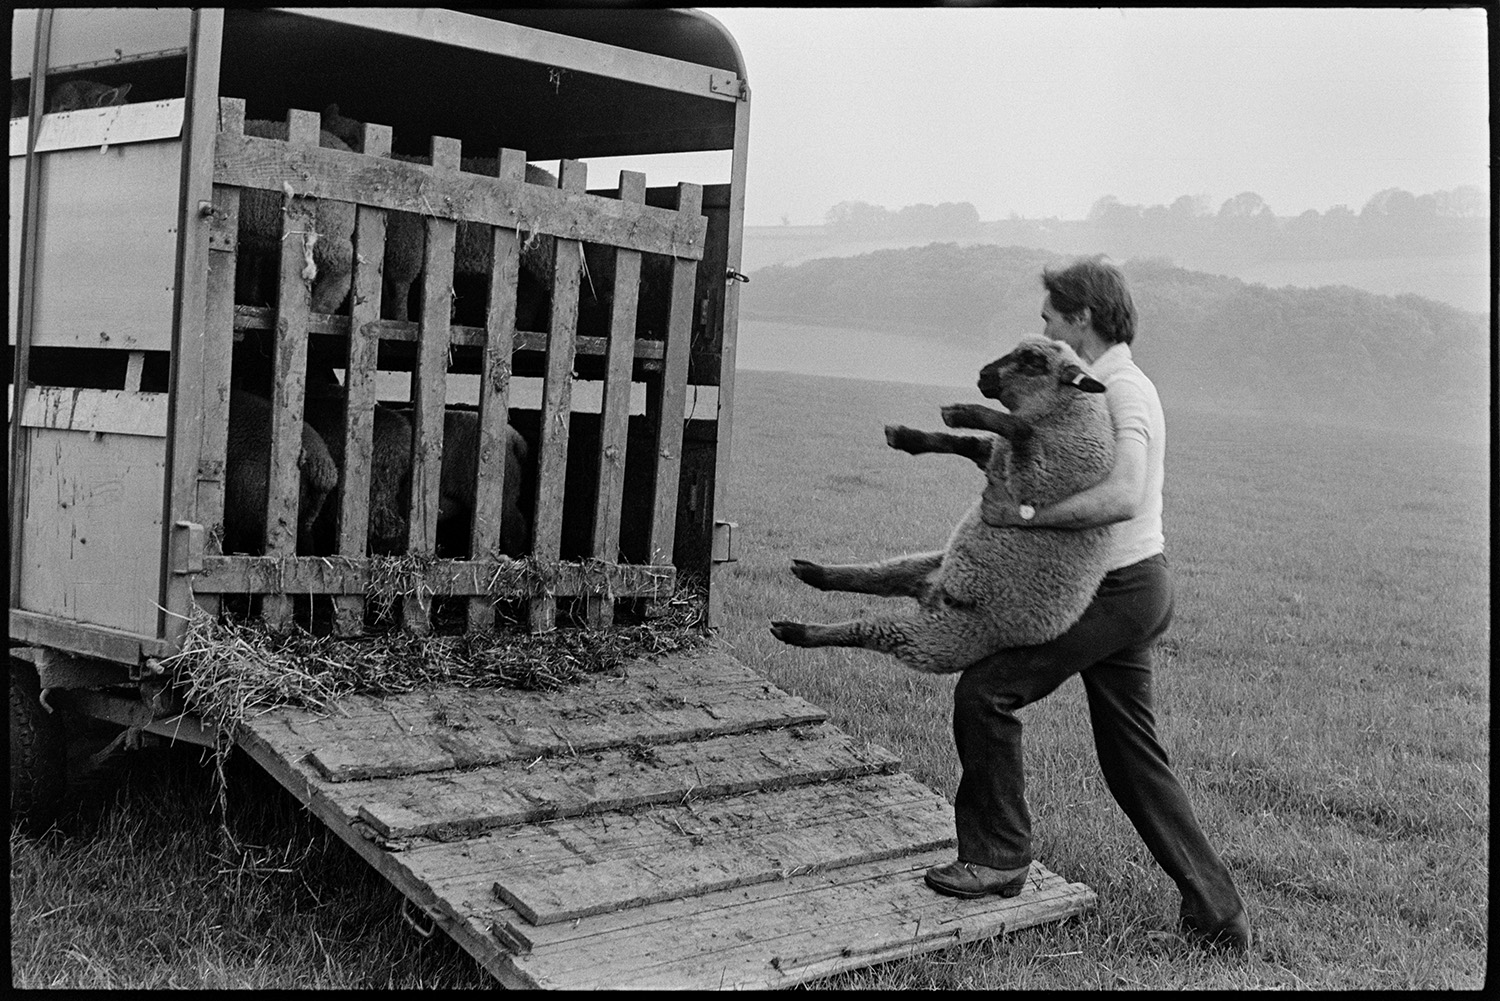 Farmers weighing sheep. 
[Mr Cole carrying a sheep into a trailer, after weighing and sorting the sheep, in a field at Densham, Ashreigney.]